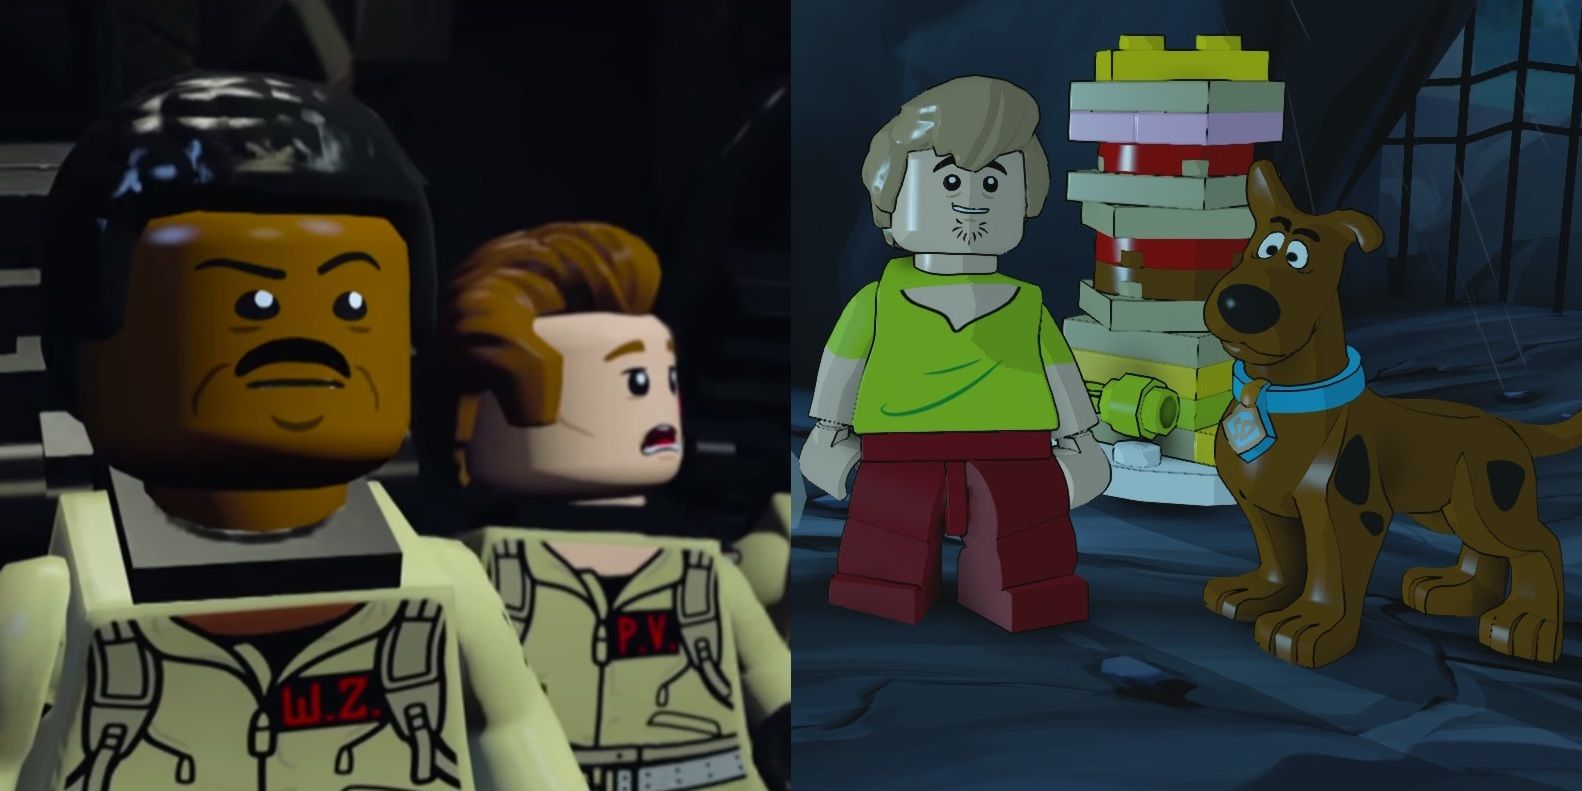 Lego Dimensions Ghostbusters featuring Winston and Peter Venkman, with Scooby-Doo and Shaggy